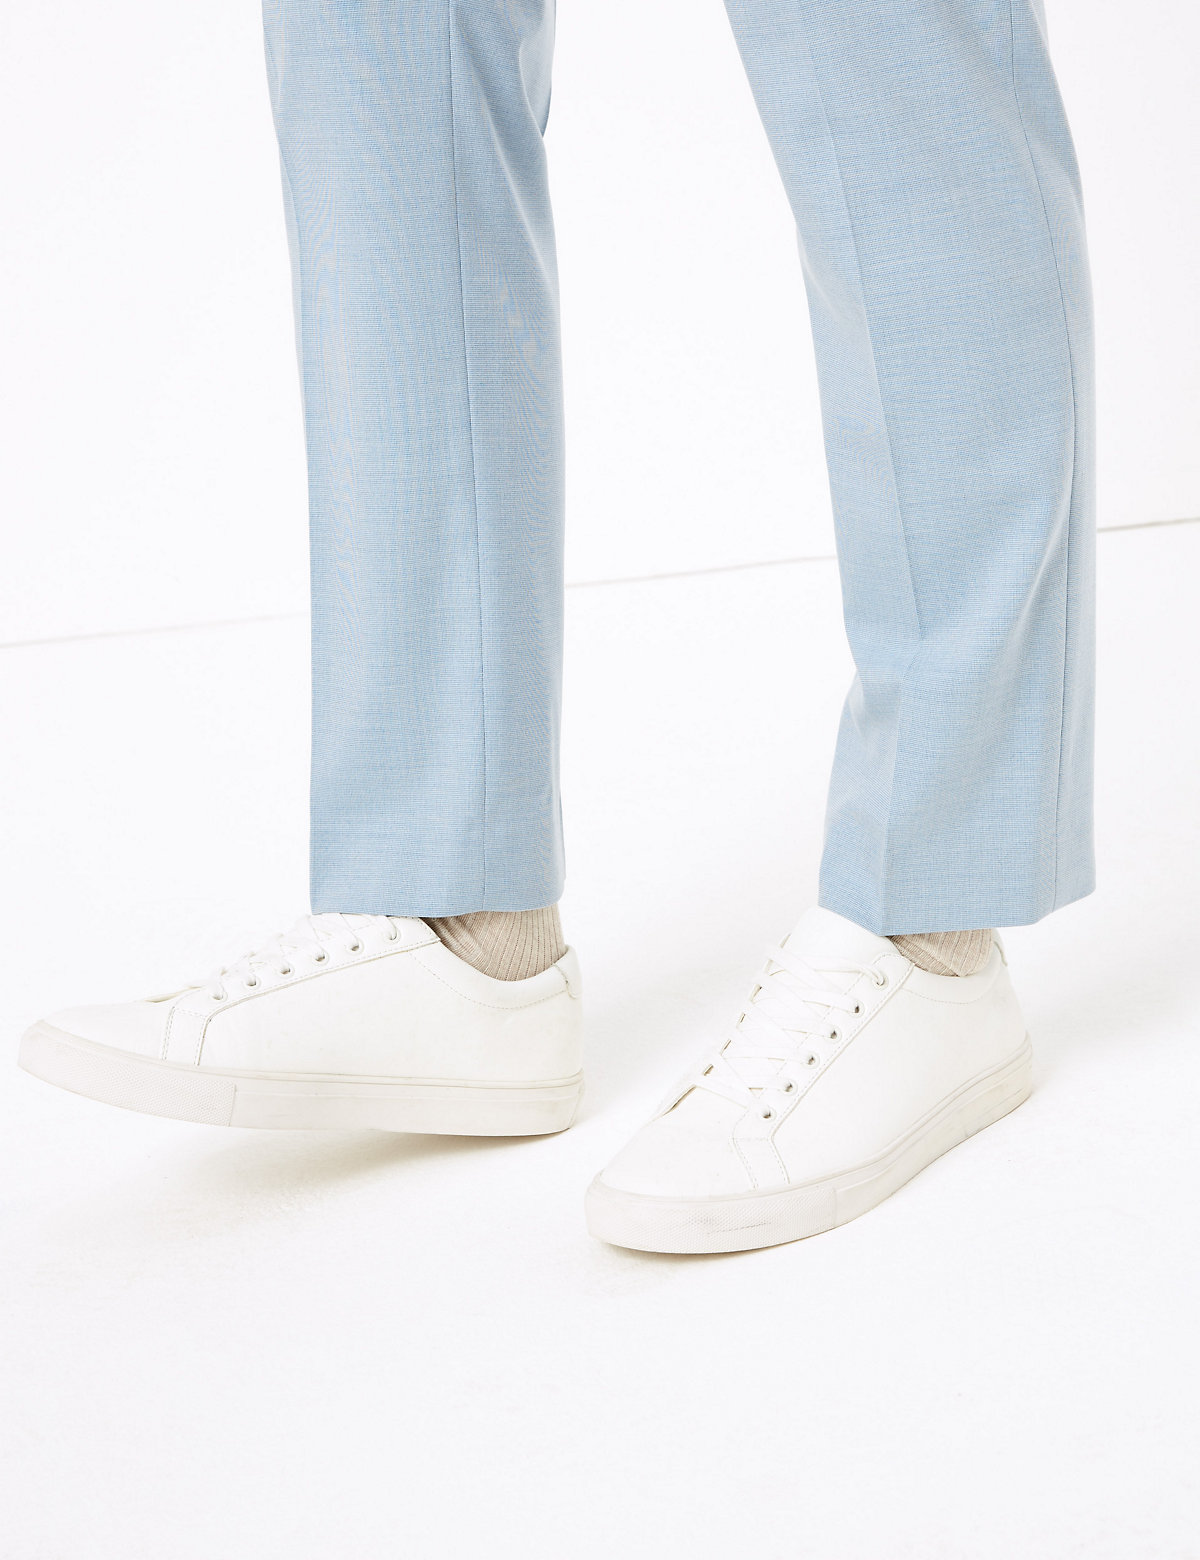 Pastel Tailored Fit Trousers with Stretch